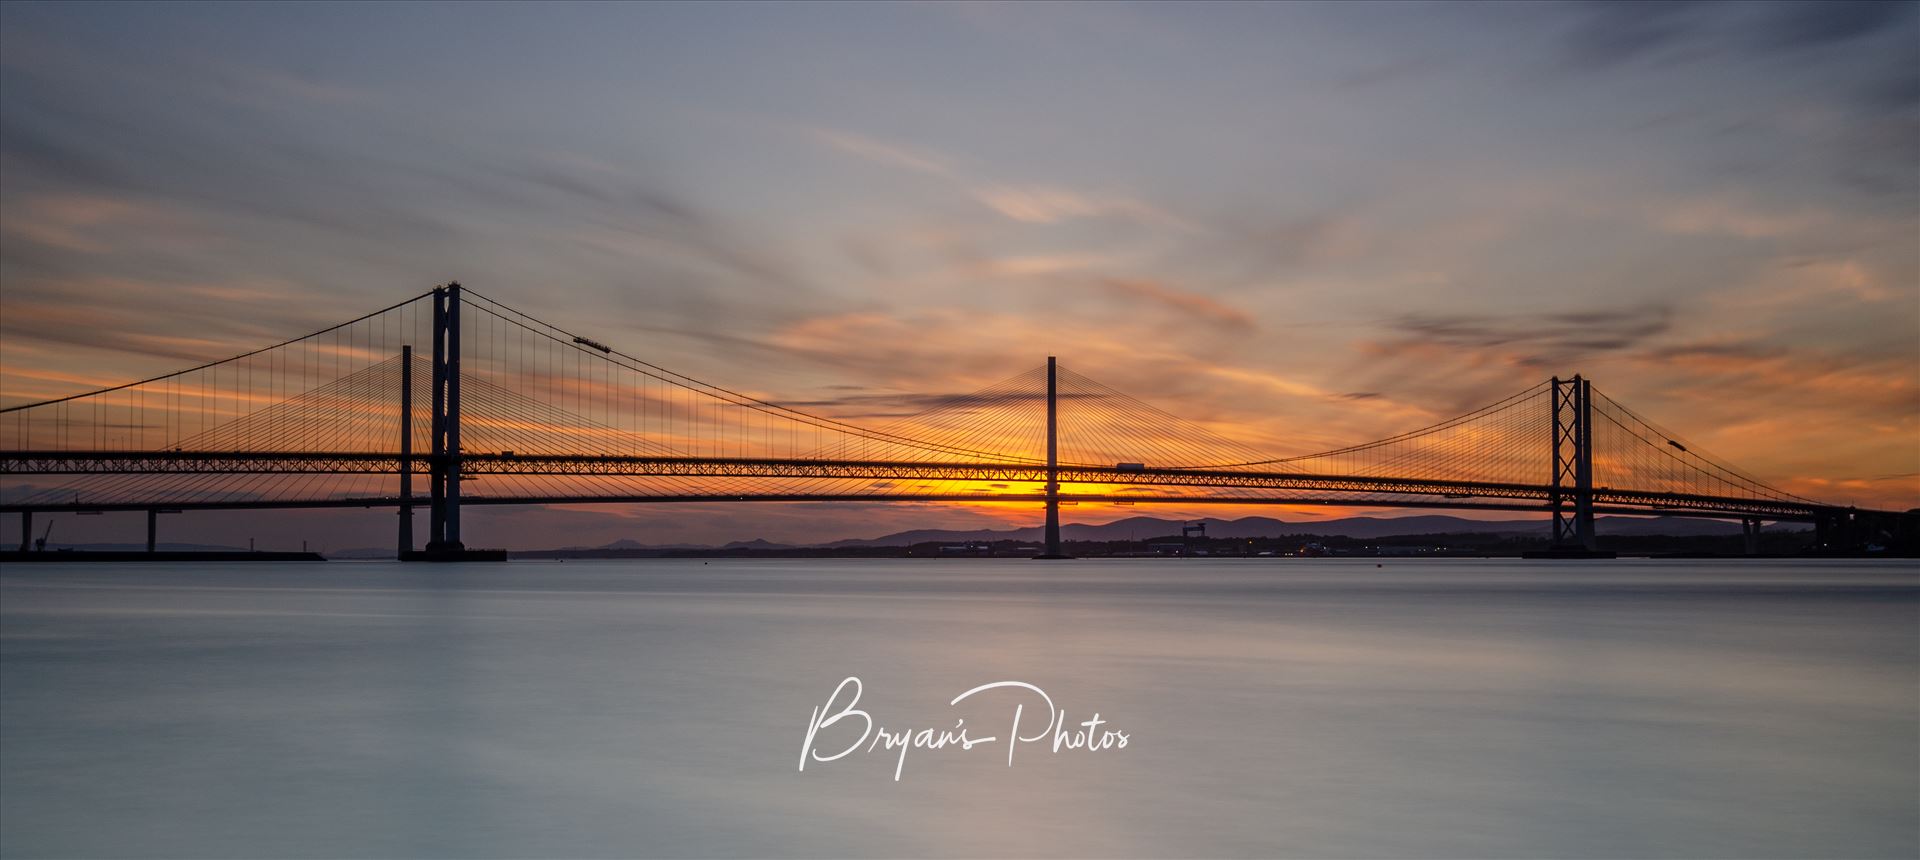 Road Bridges at Sunset A photograph of the Forth Road Bridge and Queensferry crossing taken at sunset from Hawes Pier South Queensferry. by Bryans Photos